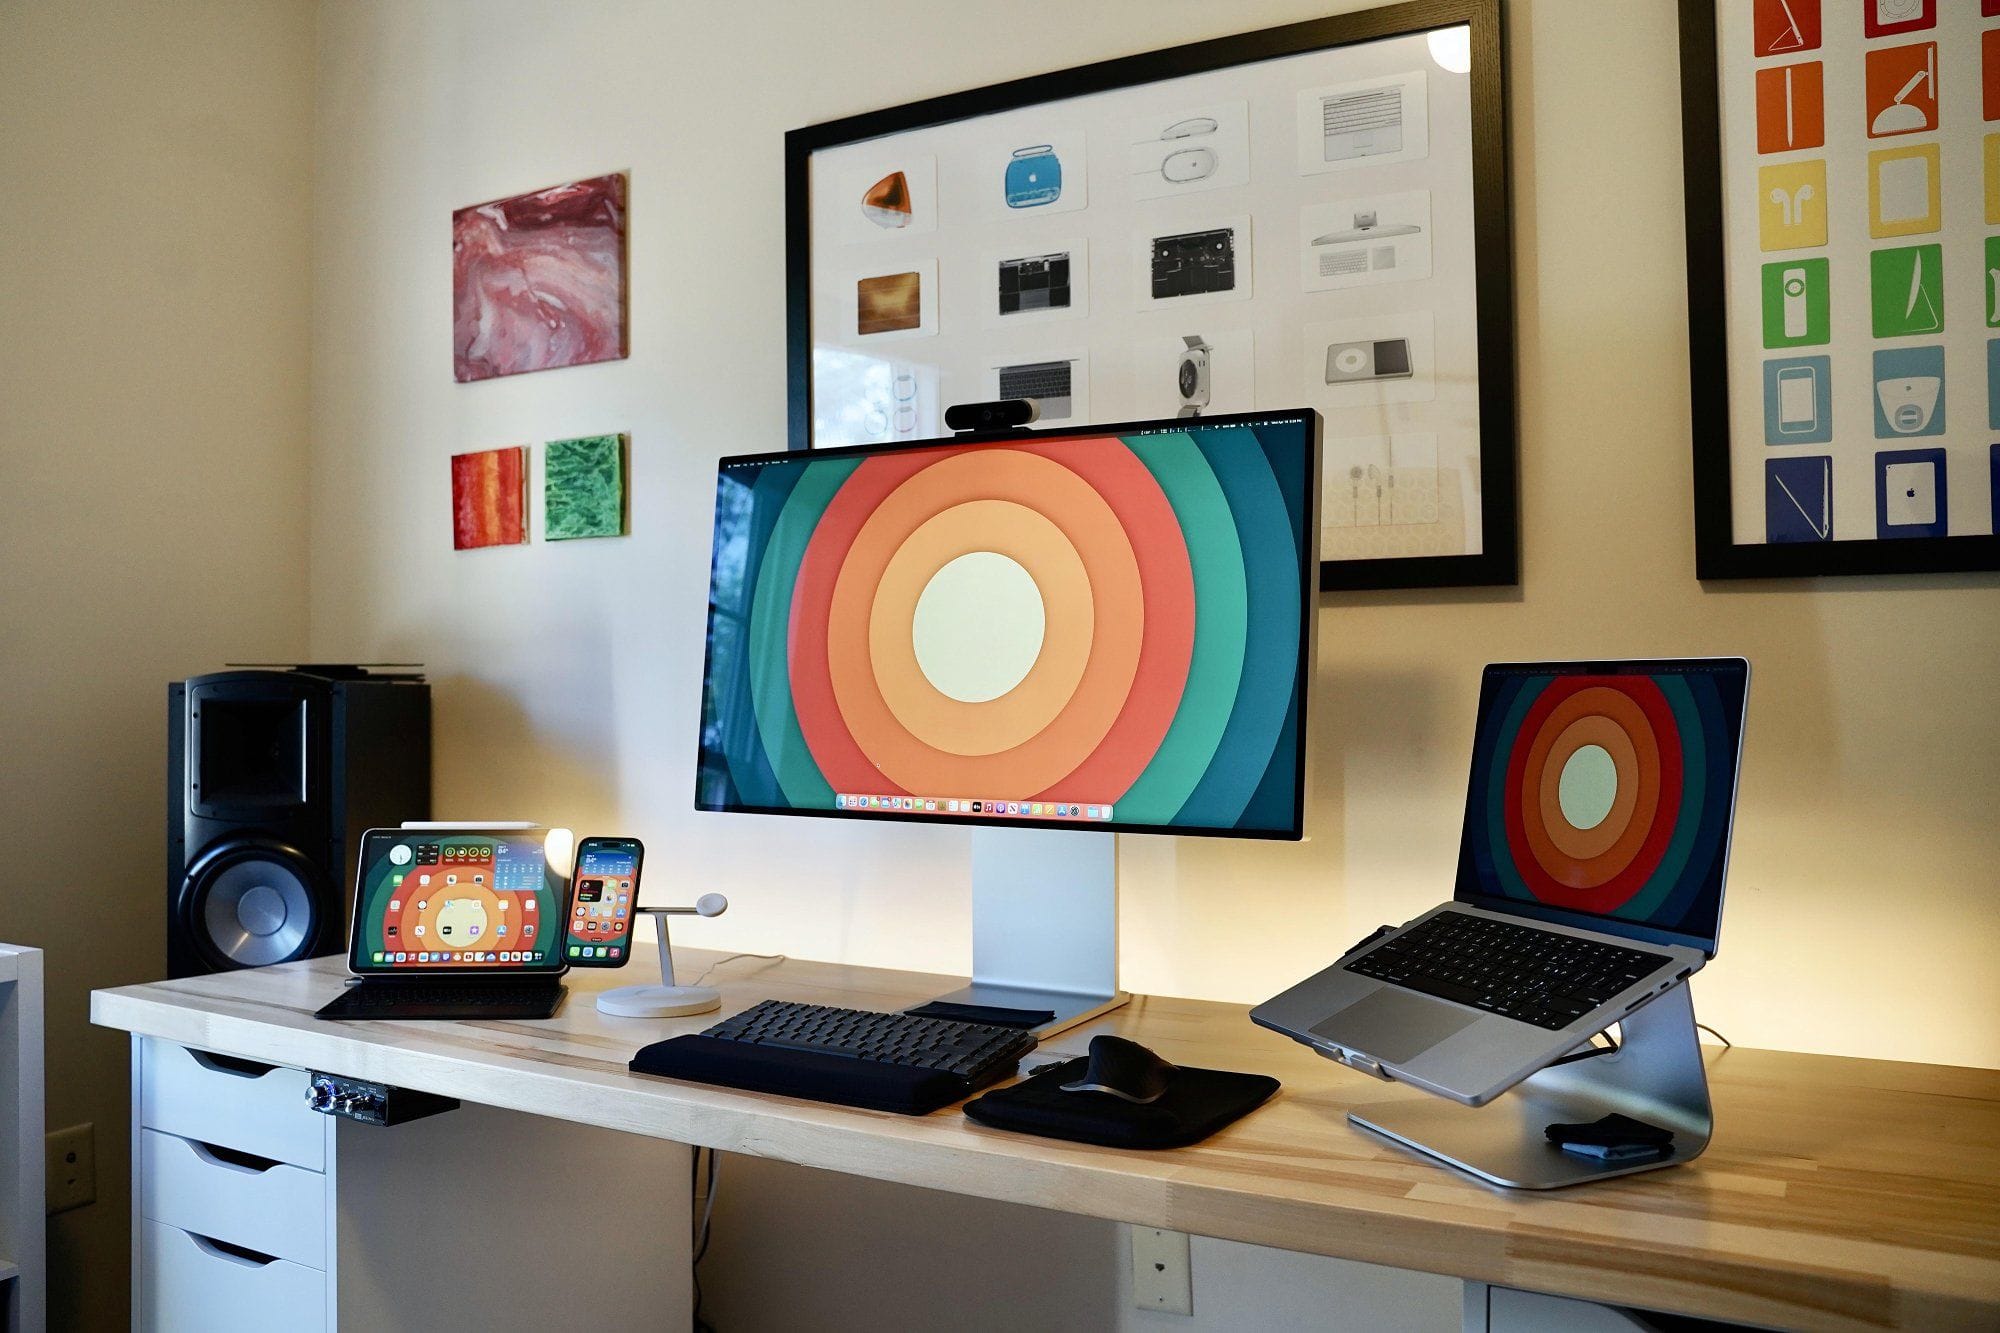 A contemporary Apple desk setup, accompanied by an iPad, iPhone on a charging stand, and a MacBook on a raised platform, flanked by abstract art and framed designs on the wall, on a wooden desk with a white drawer unit